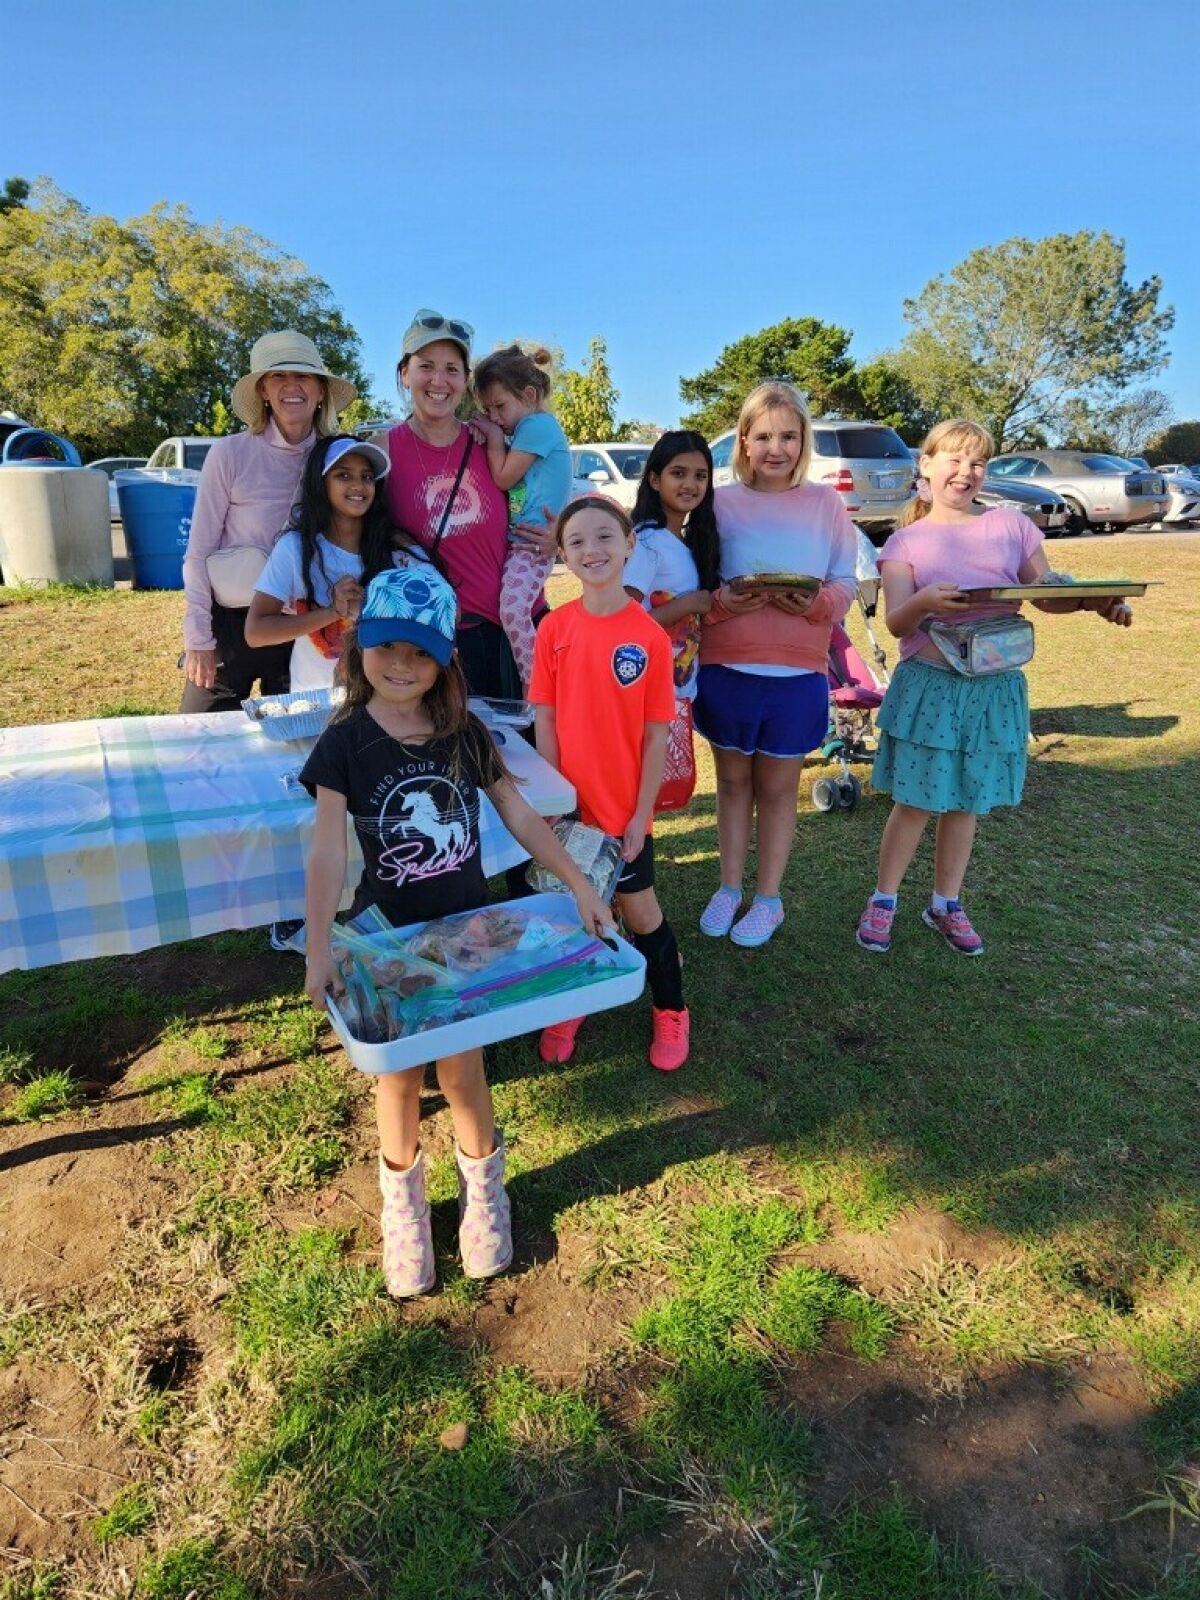 Members of the La Jolla team of Girls on the Run raised money for area causes during a bake sale.